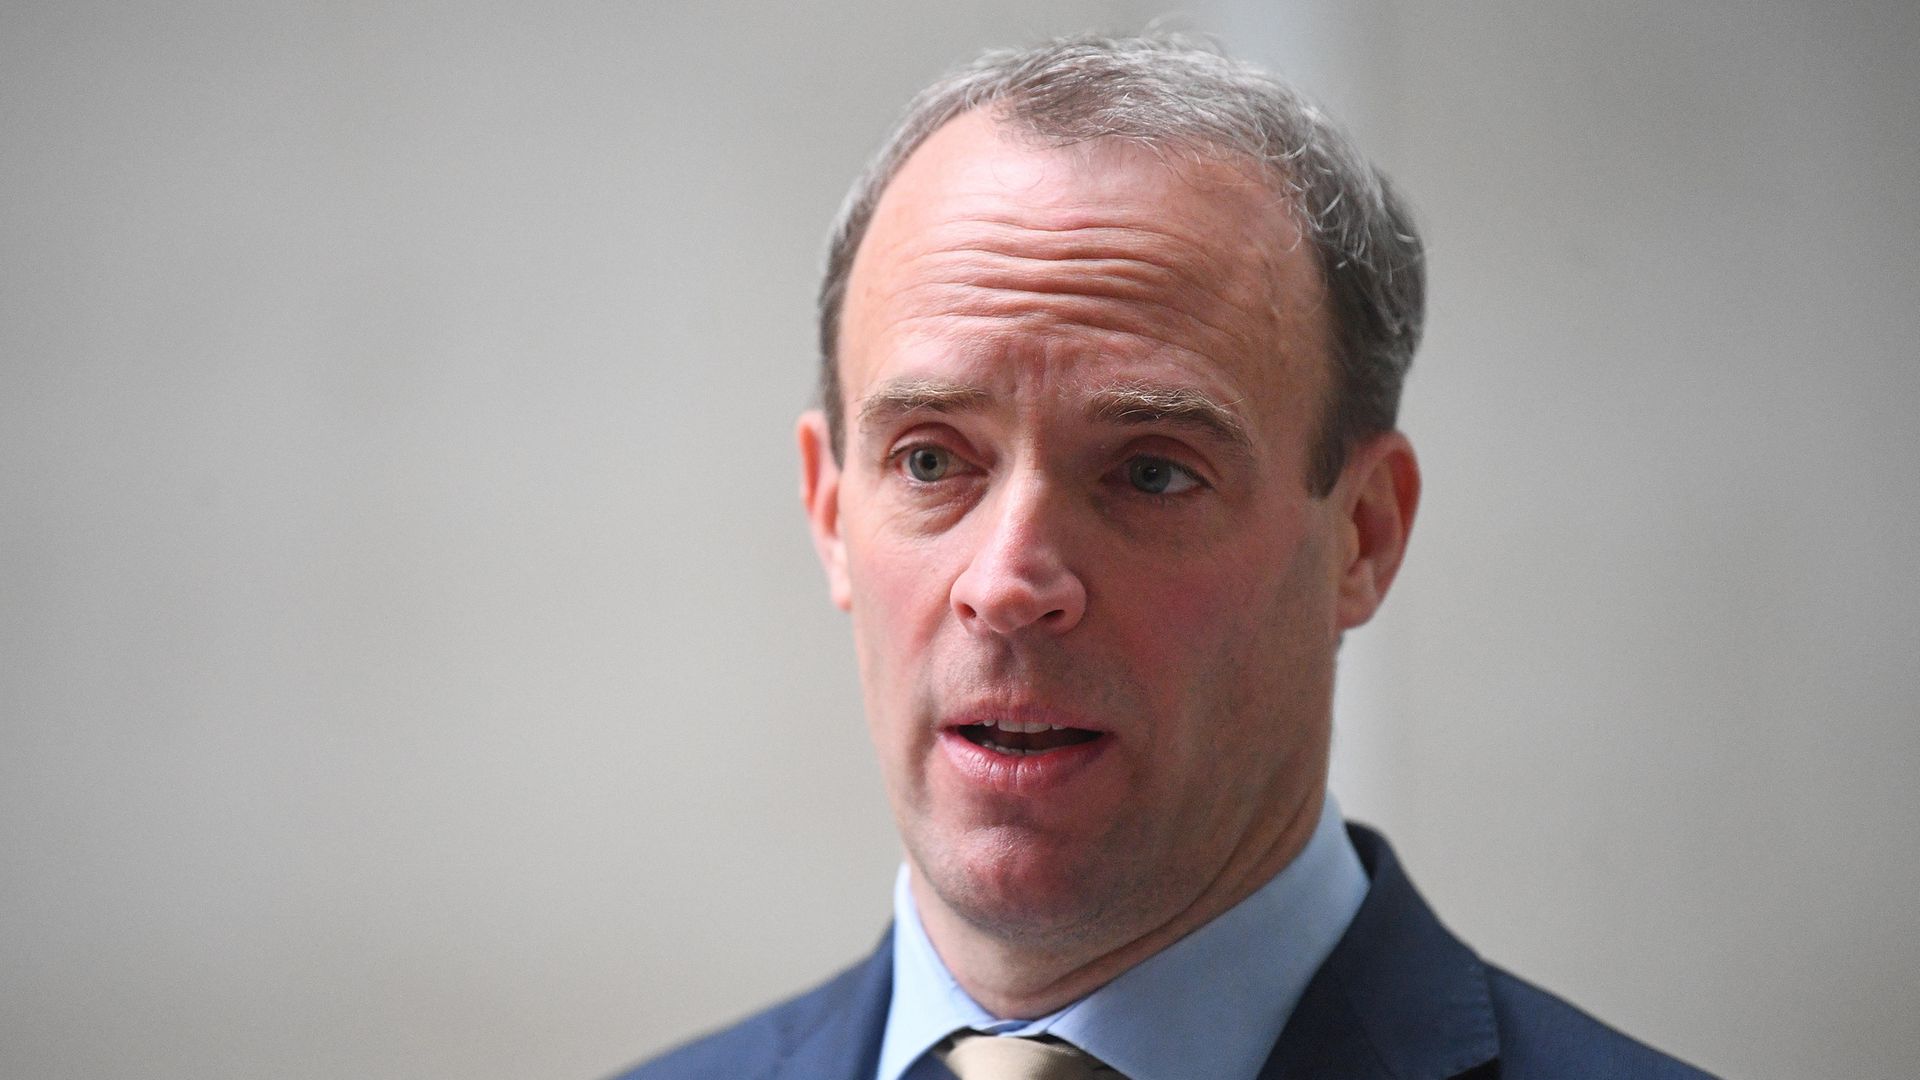 Foreign secretary Dominic Raab speaks to the media outside BBC Broadcasting House in central London - Credit: PA